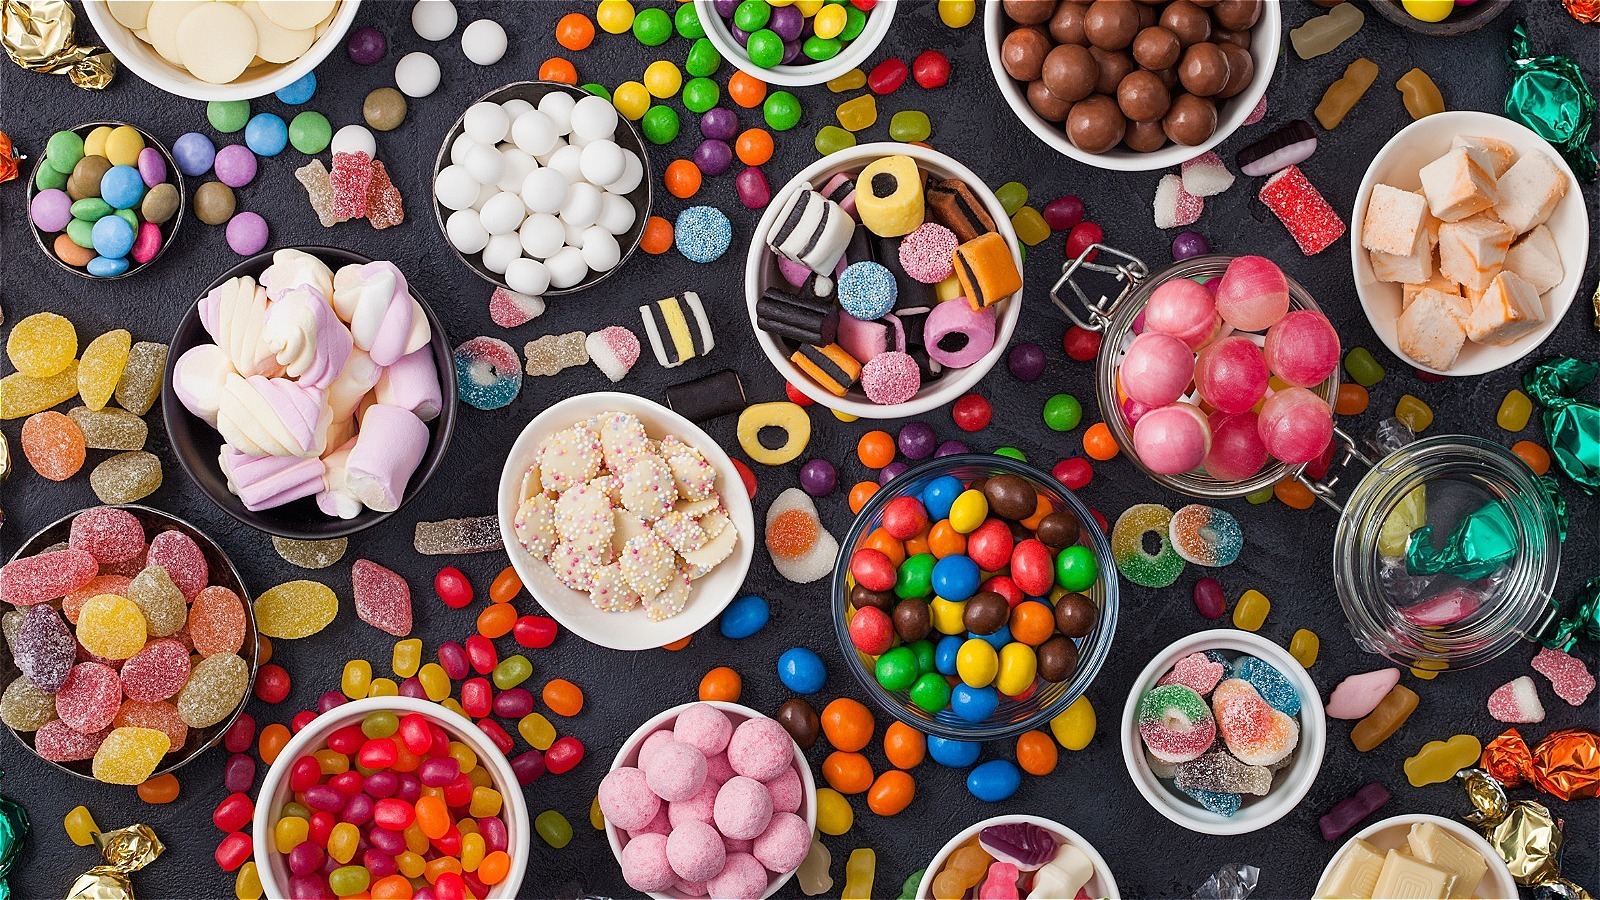 The Reason Pink And Red Candies Are Irresistible, According To Science